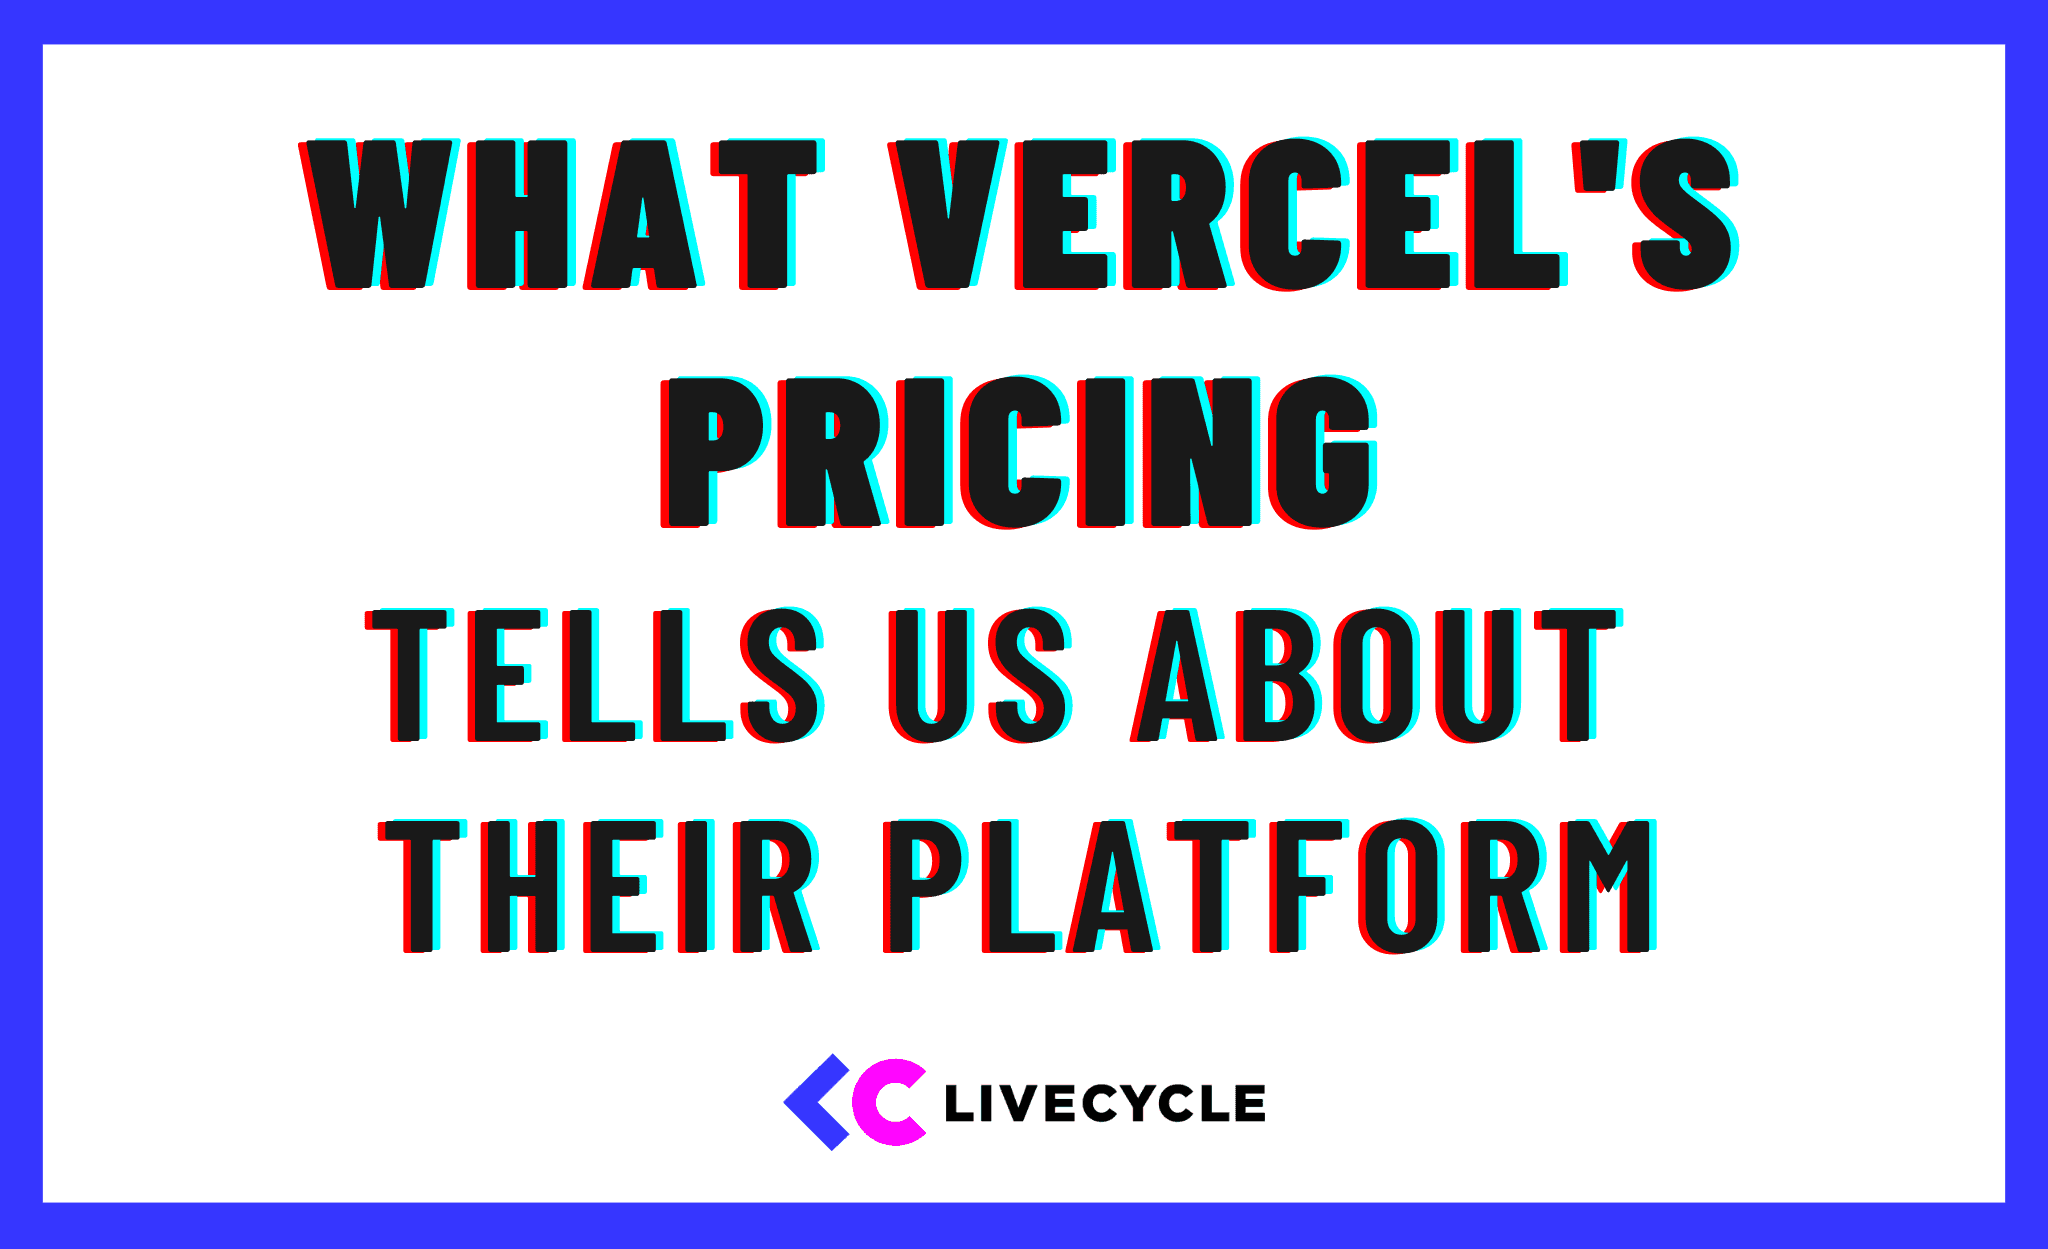 Vercel Pricing: What Vercel's pricing model tells us about their service